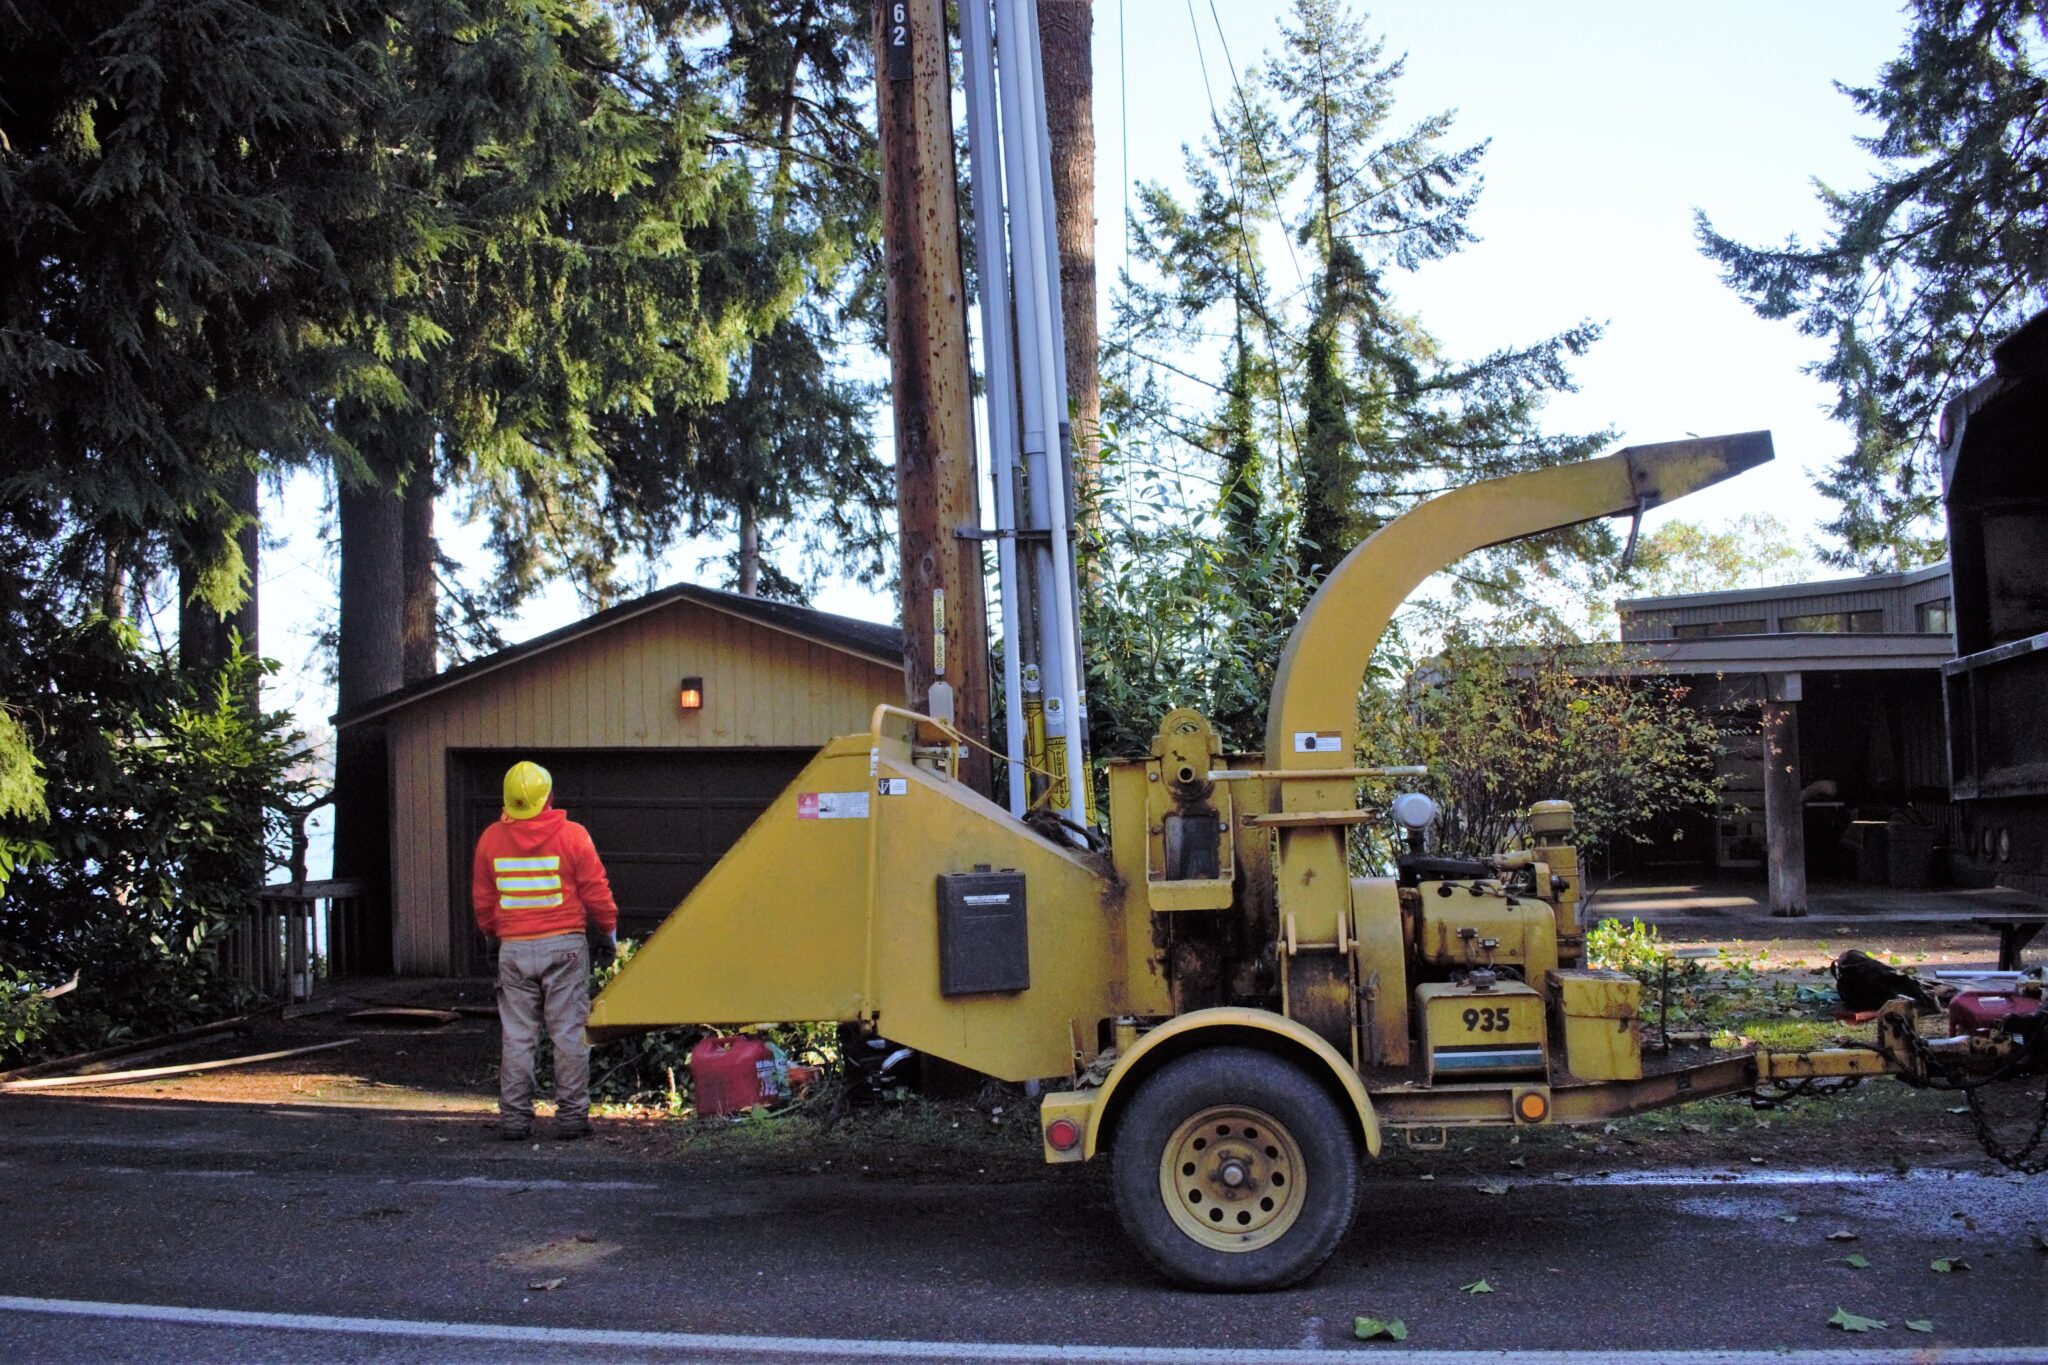 Utility company working next to home